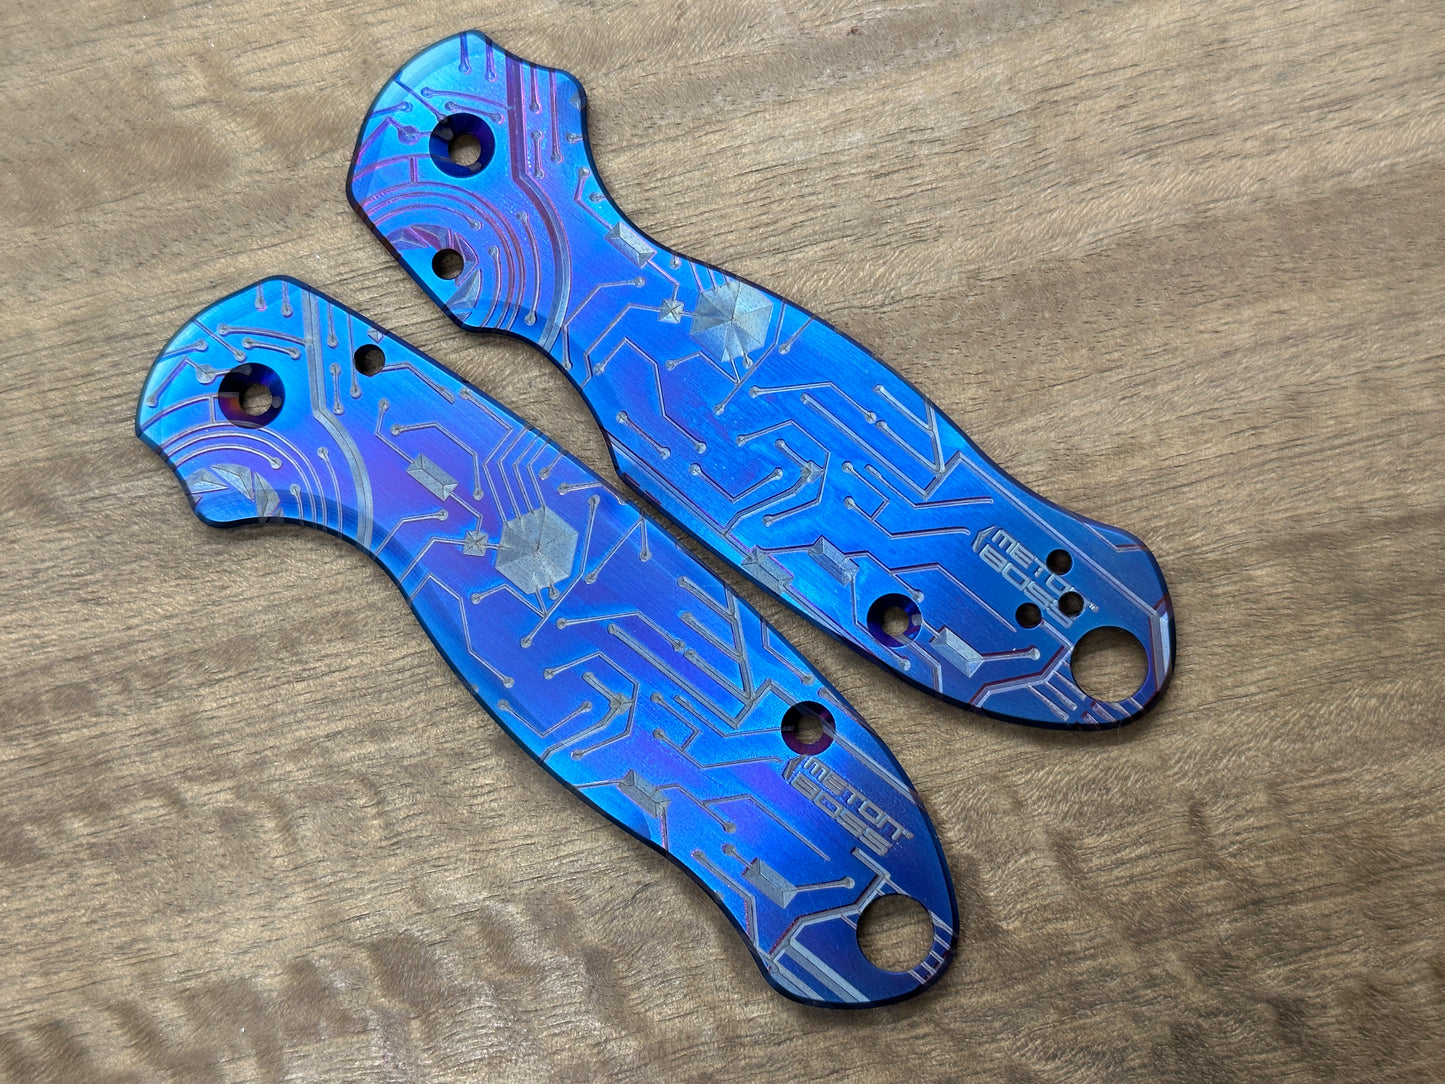 Flamed CIRCUIT BOARD engraved Titanium Scales for Spyderco Para 3